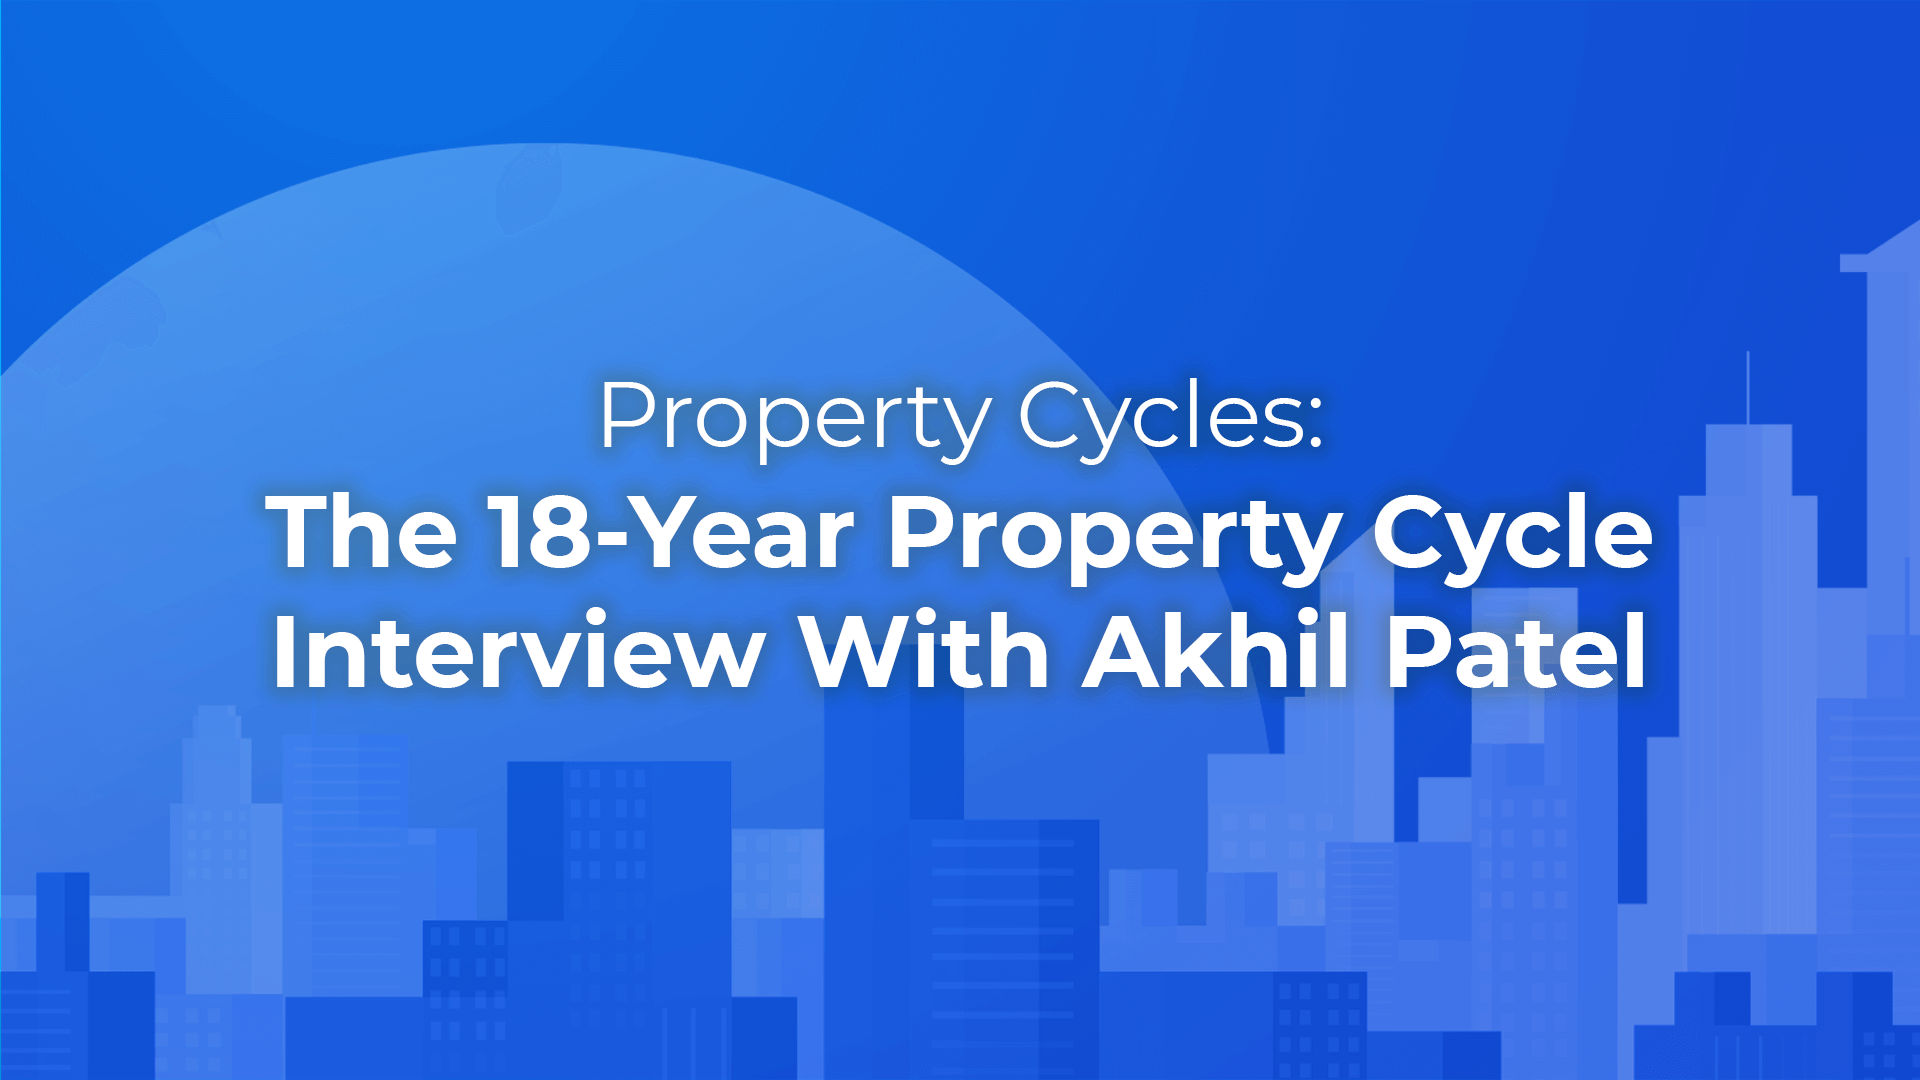 Property Cycles - The 18-Year Property Cycle Interview with Akhil Patel